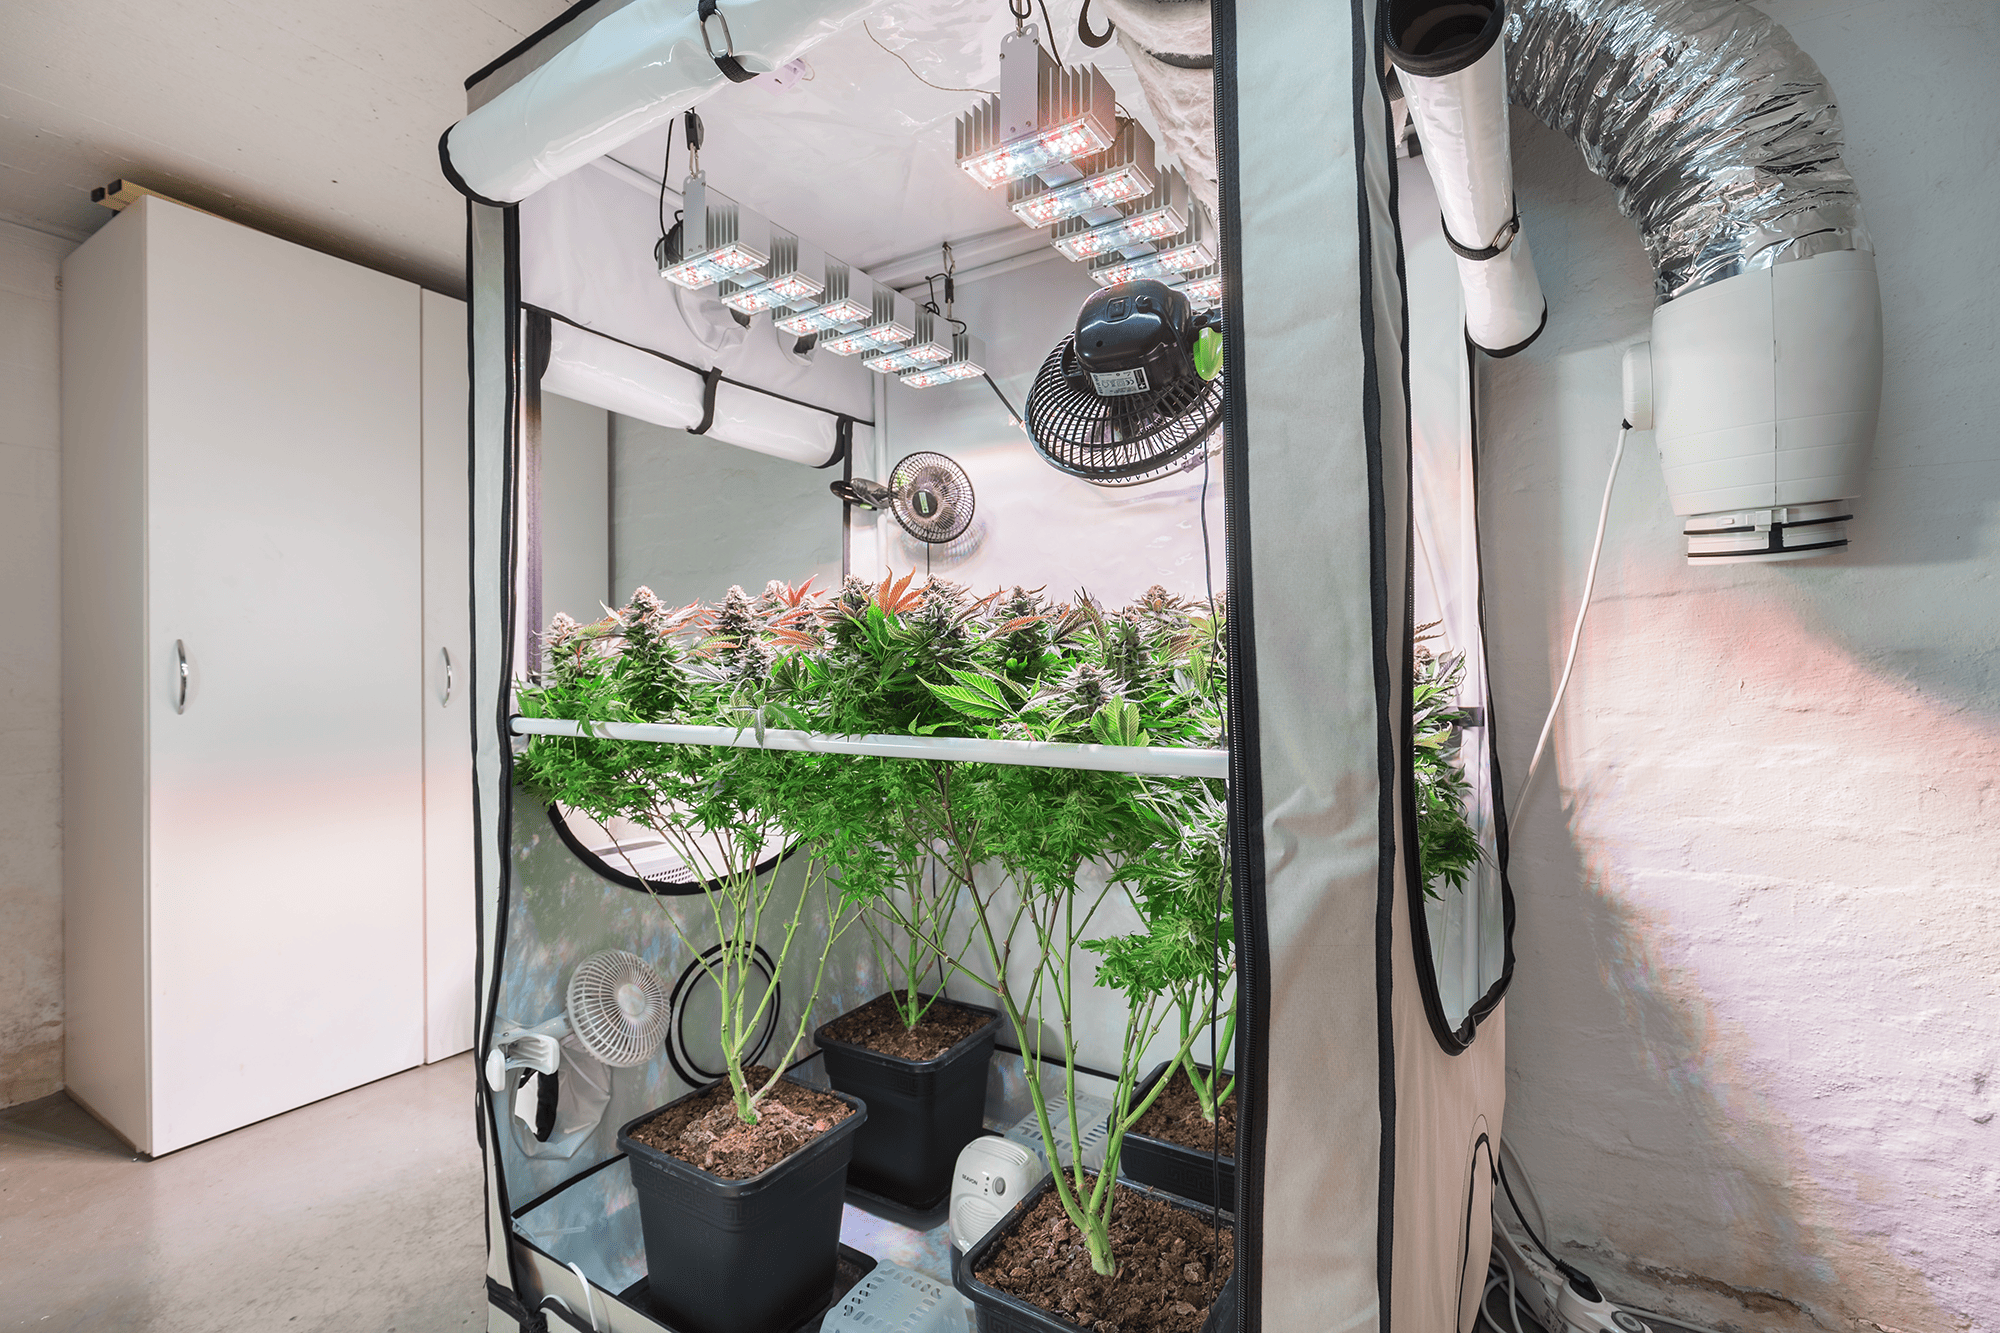 Northern Lights Cannabis Plants In Grow Tent During Flowering Stage